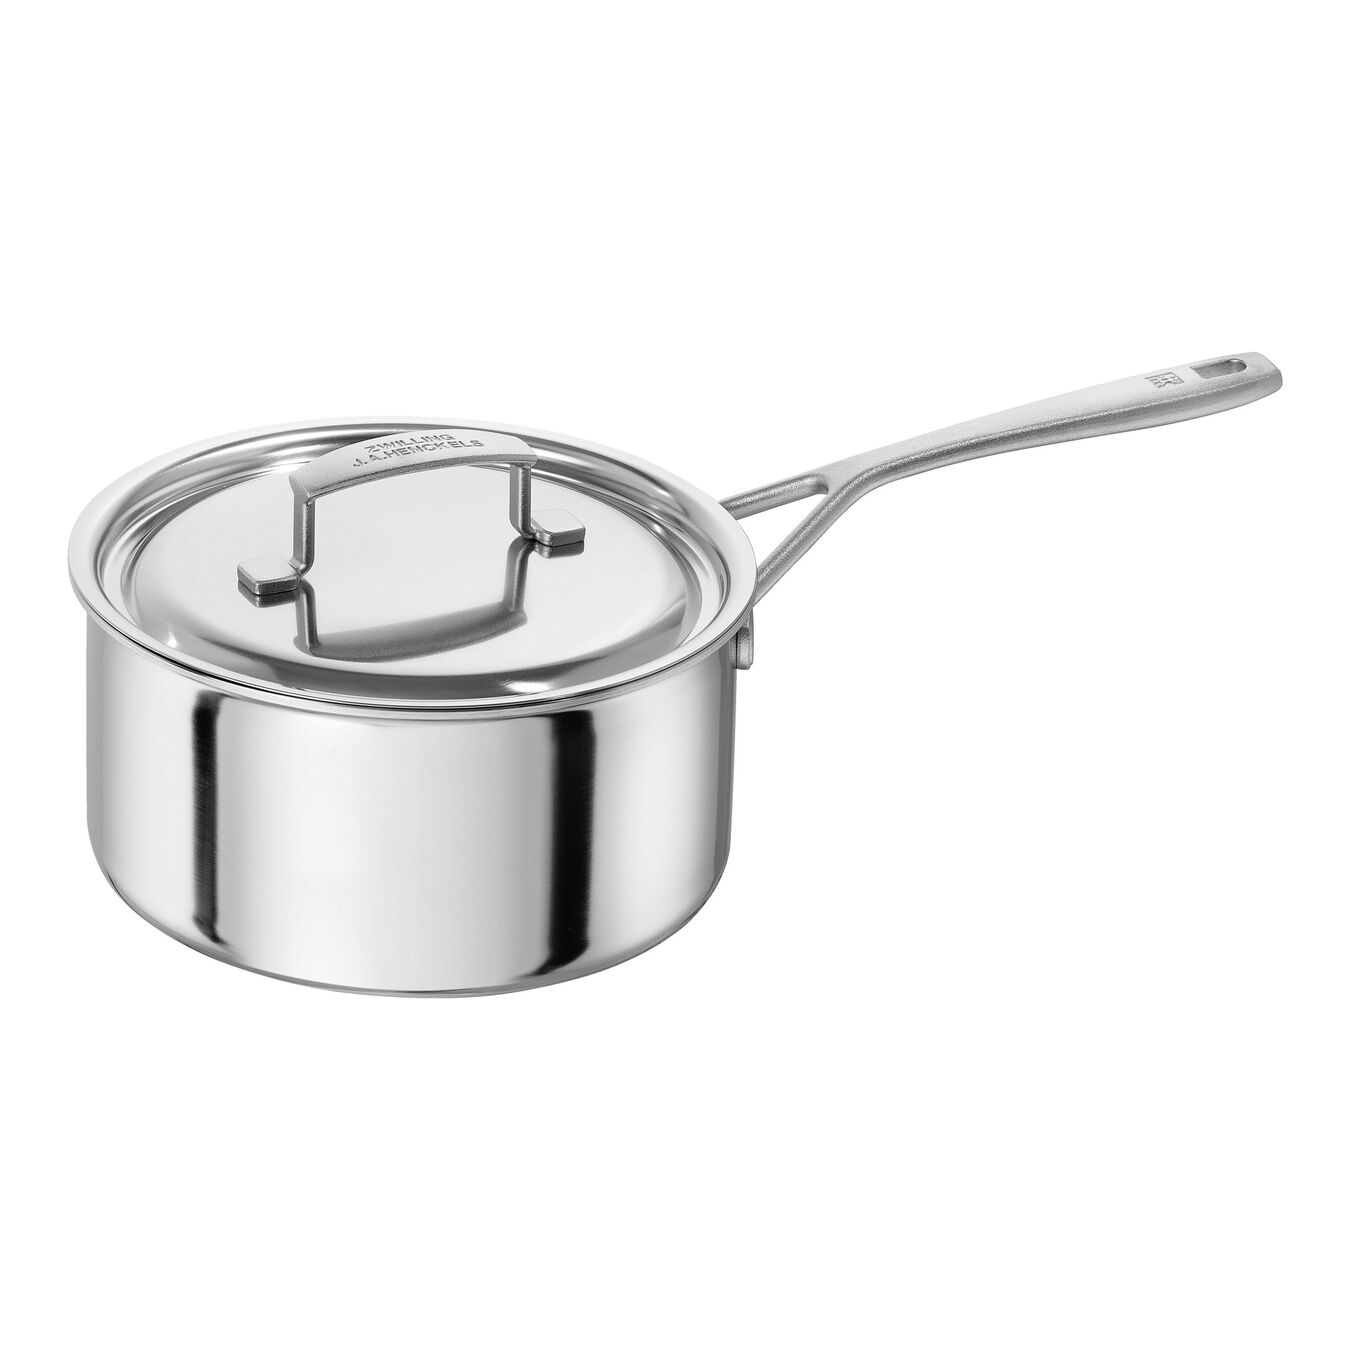 2.75 l 18/10 Stainless Steel round Sauce pan with lid, silver,,large 1